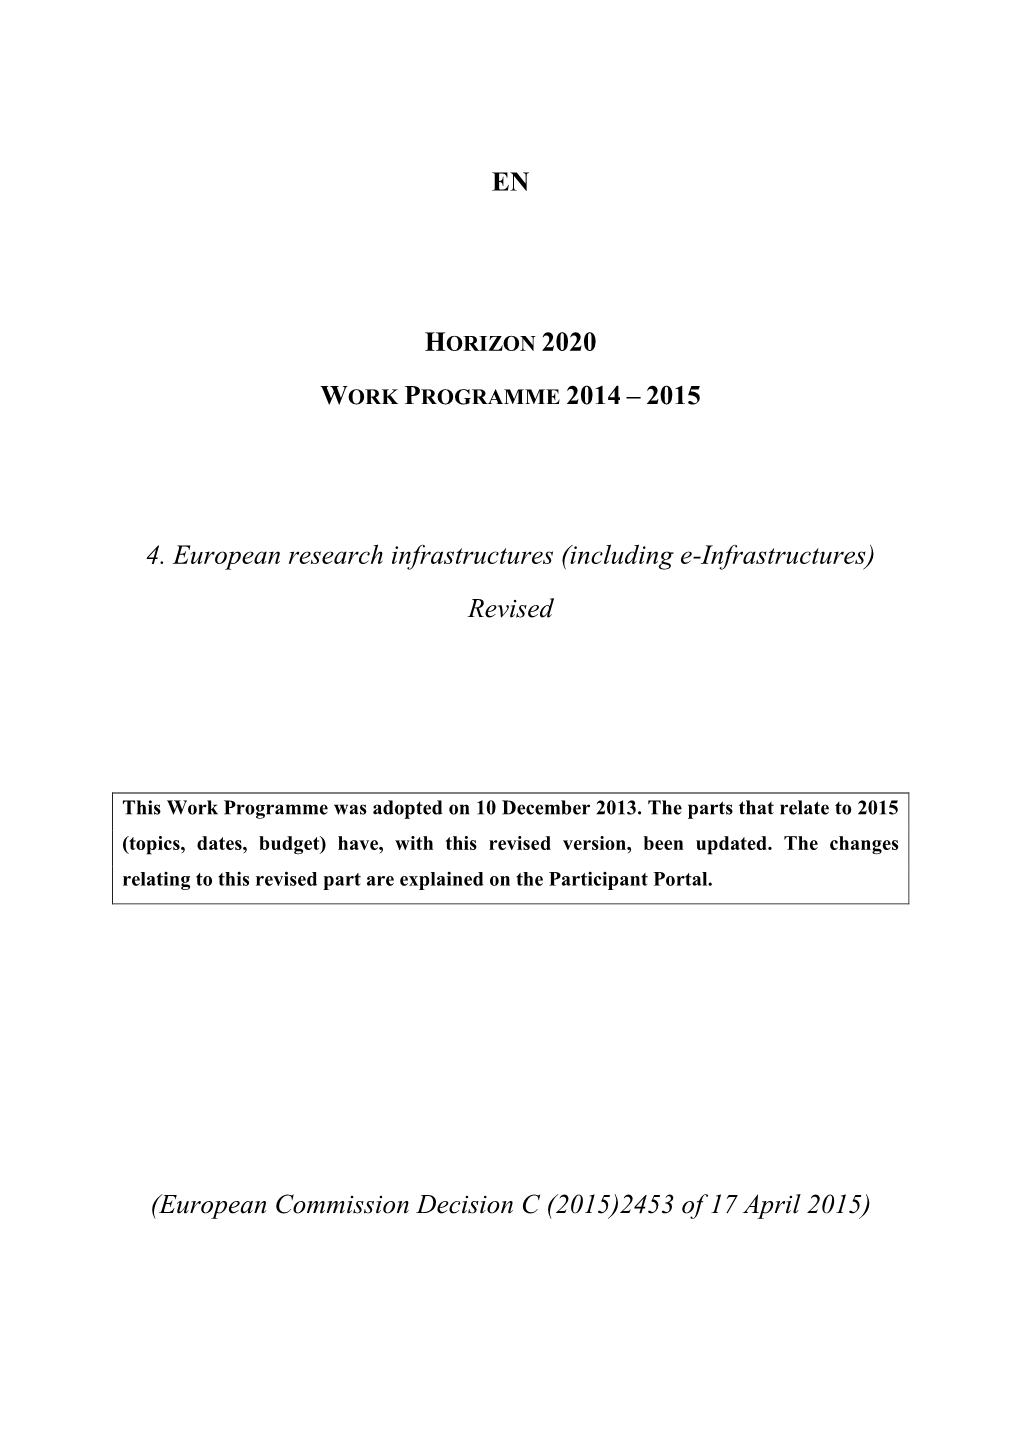 4. European Research Infrastructures (Including E-Infrastructures) Revised